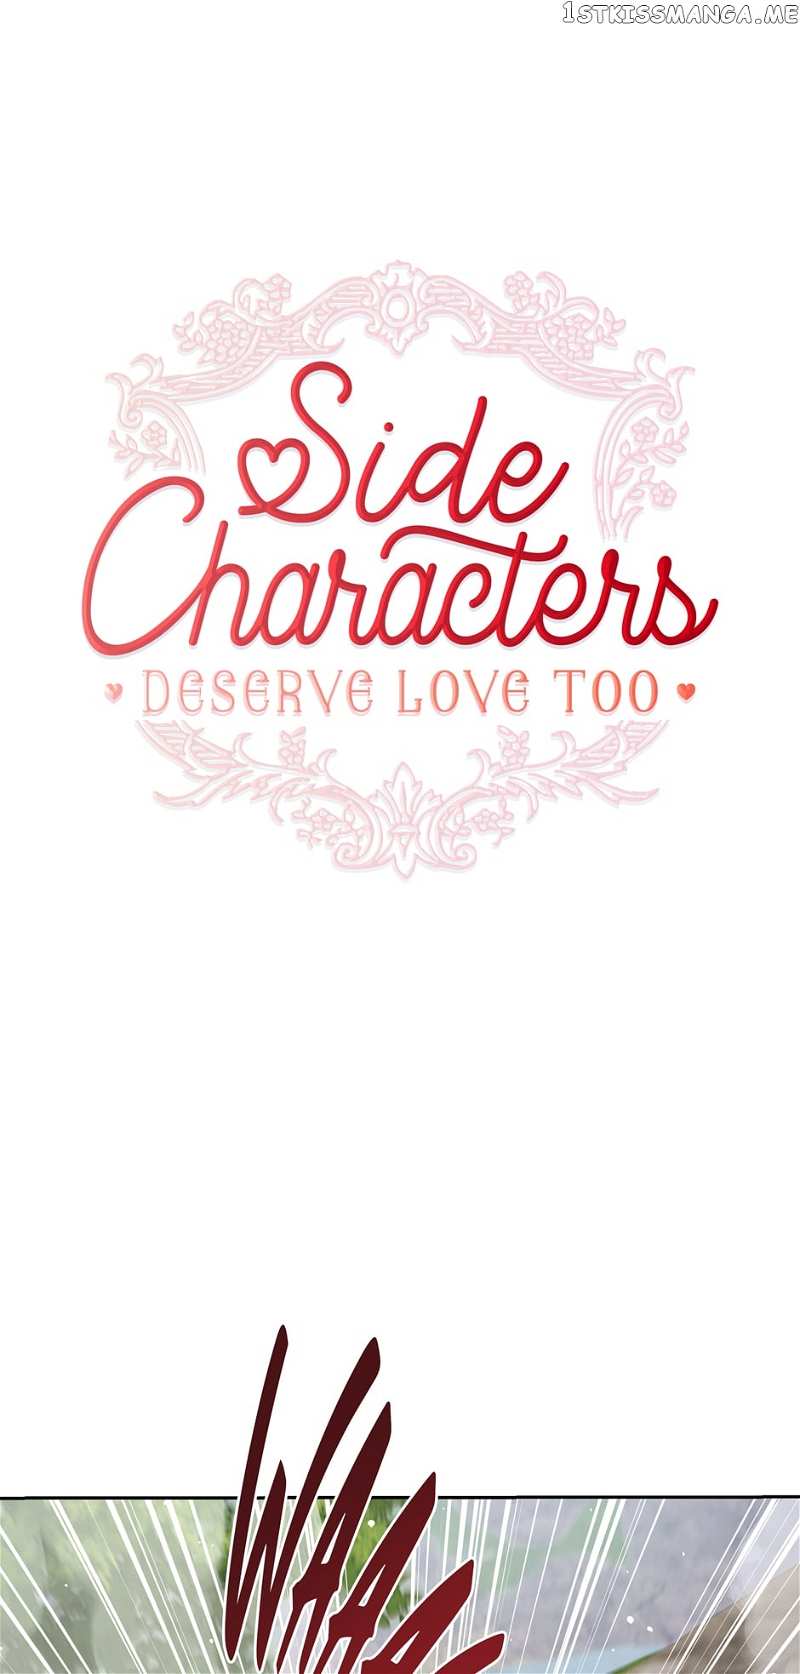 Side Characters Deserve Love Too  - page 1